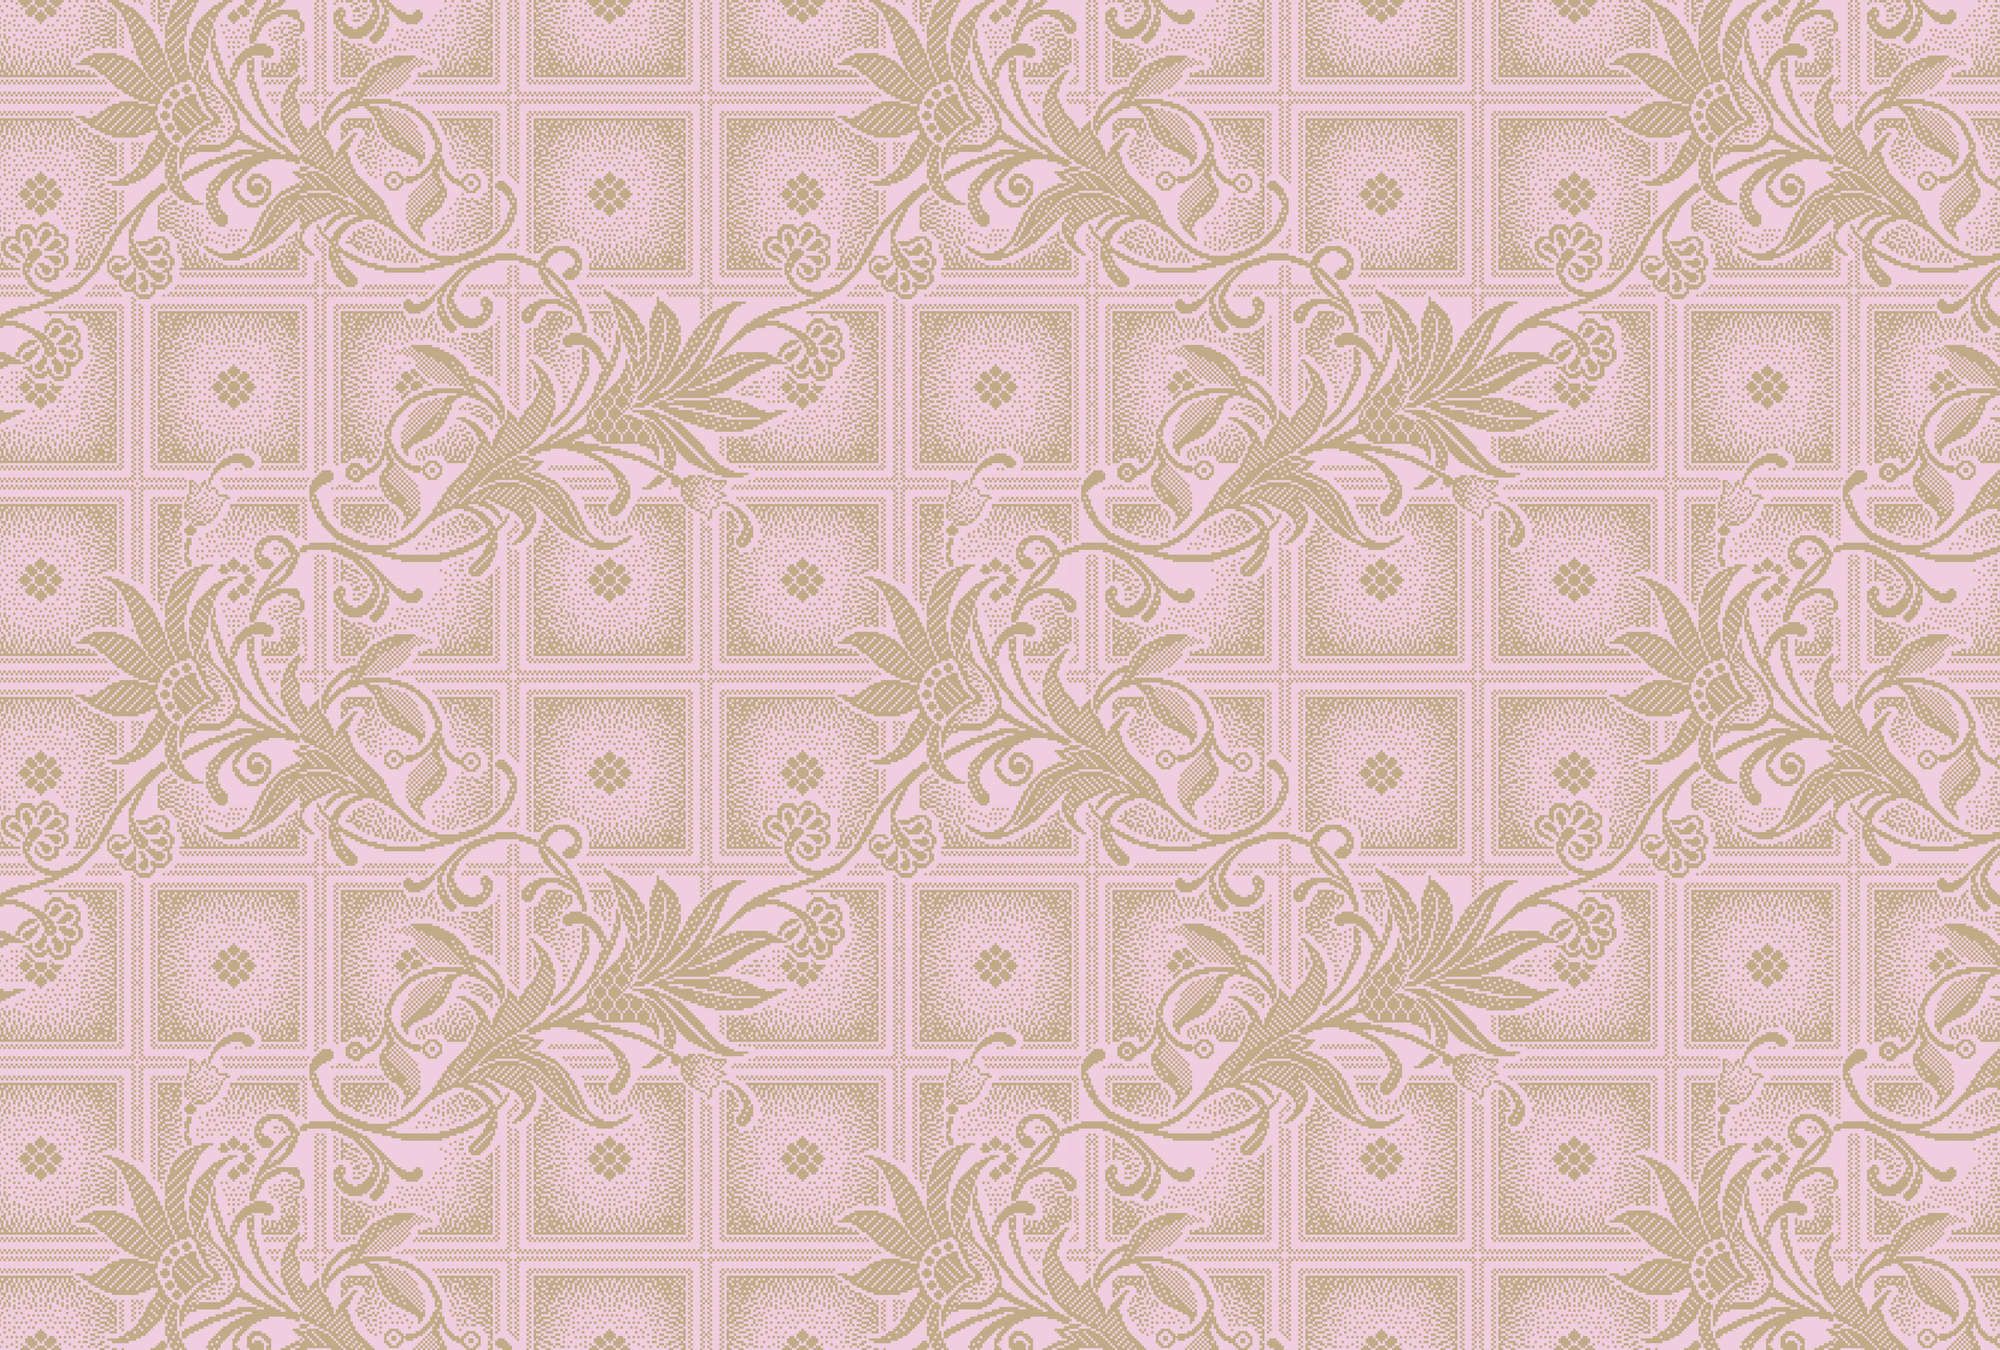             Photo wallpaper »vivian« - Pixel style squares with flowers - Pink | Smooth, slightly pearly shimmering non-woven fabric
        